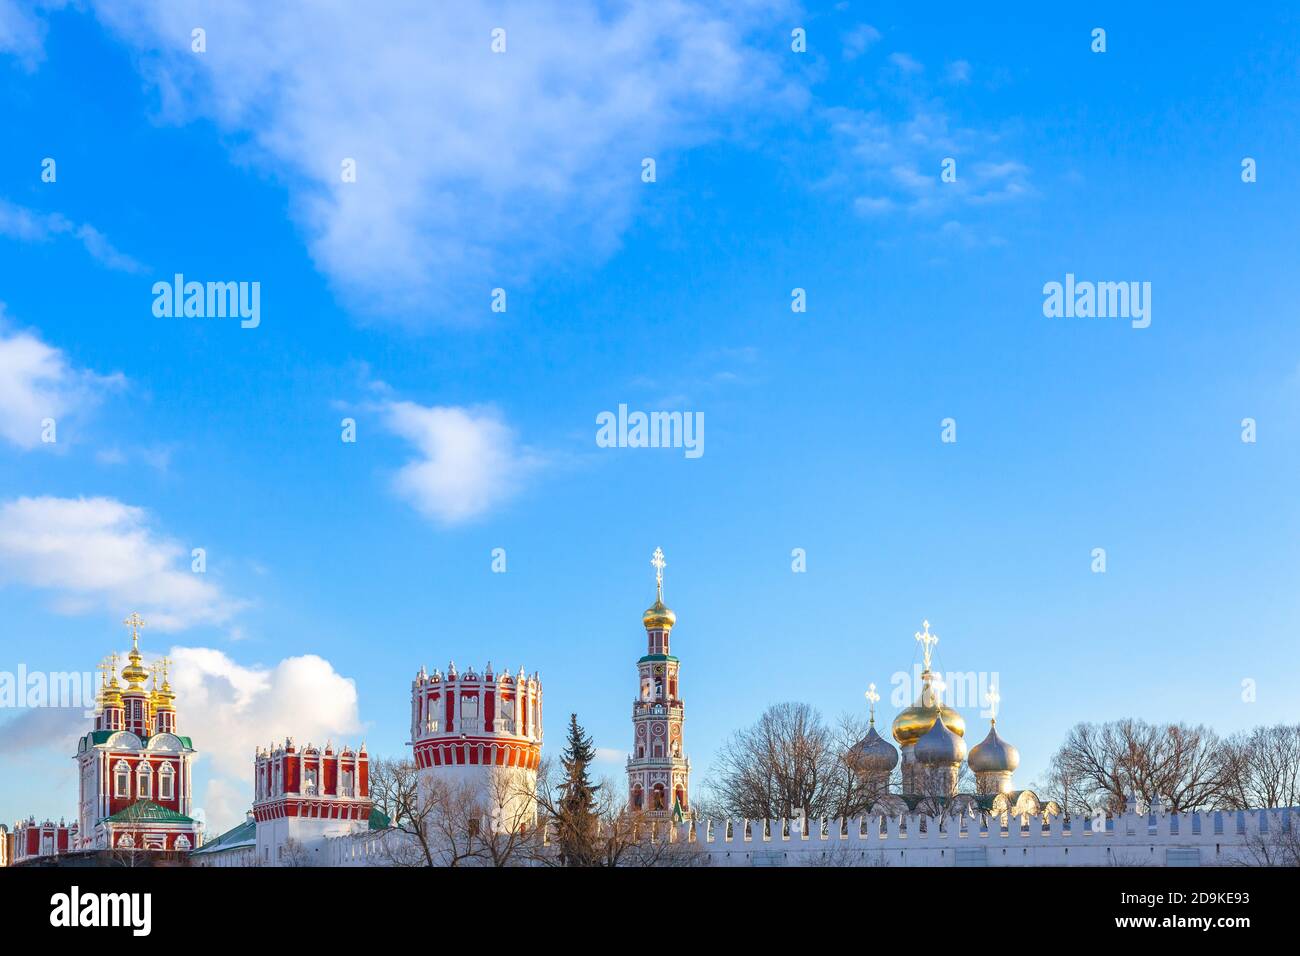 A view of the Novodevichy Convent in winter, UNESCO heritage site, Moscow, Russia Stock Photo